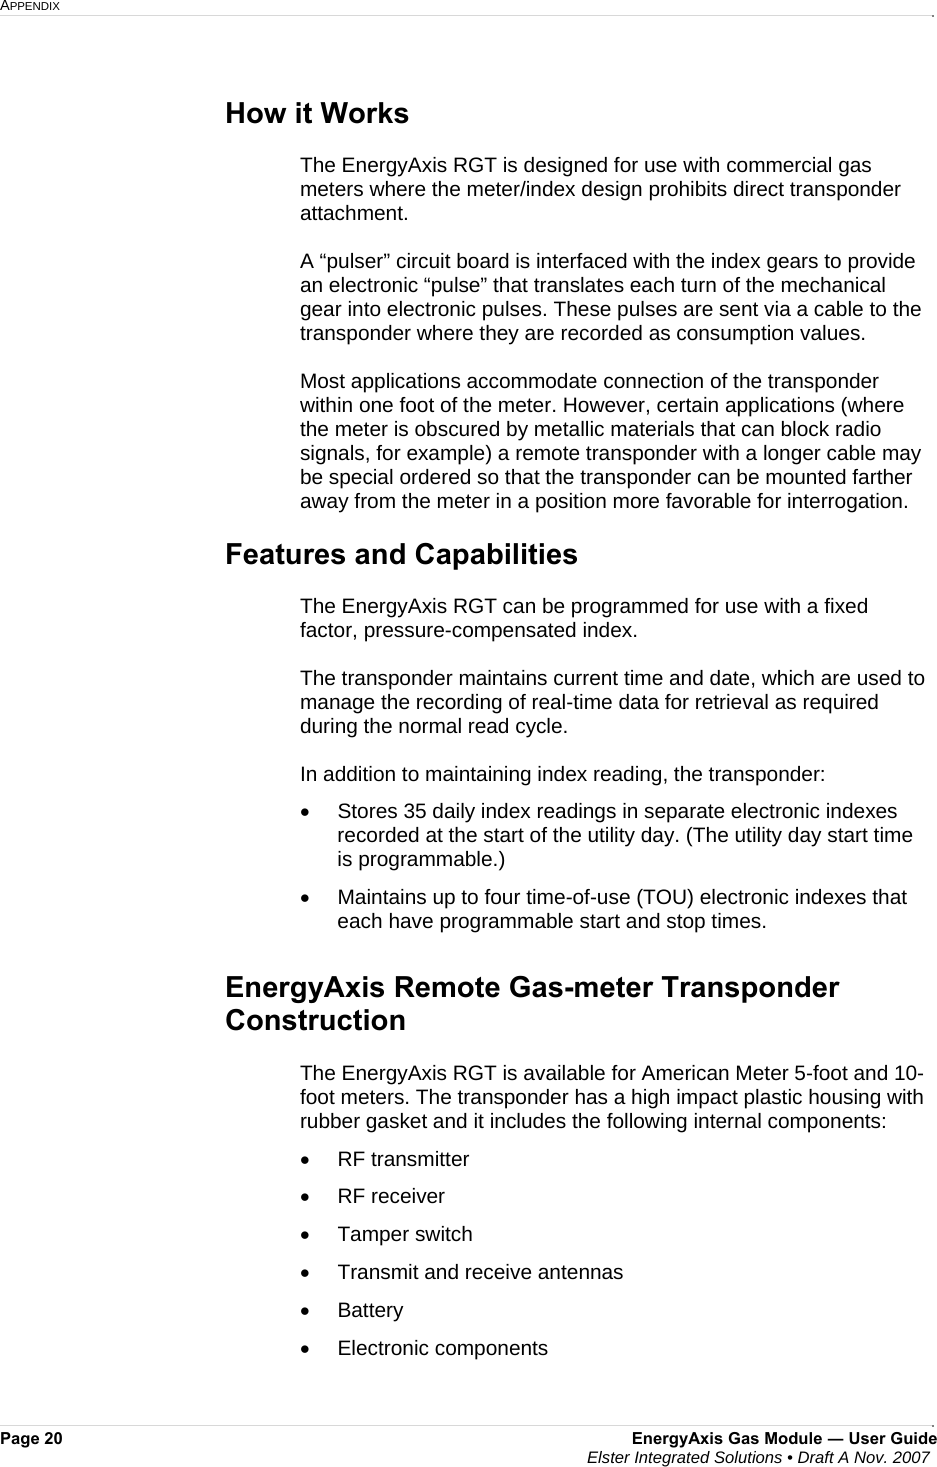 APPENDIX     Page 20  EnergyAxis Gas Module ― User Guide  Elster Integrated Solutions • Draft A Nov. 2007   How it Works  The EnergyAxis RGT is designed for use with commercial gas meters where the meter/index design prohibits direct transponder attachment.   A “pulser” circuit board is interfaced with the index gears to provide an electronic “pulse” that translates each turn of the mechanical gear into electronic pulses. These pulses are sent via a cable to the transponder where they are recorded as consumption values.  Most applications accommodate connection of the transponder within one foot of the meter. However, certain applications (where the meter is obscured by metallic materials that can block radio signals, for example) a remote transponder with a longer cable may be special ordered so that the transponder can be mounted farther away from the meter in a position more favorable for interrogation.  Features and Capabilities  The EnergyAxis RGT can be programmed for use with a fixed factor, pressure-compensated index.   The transponder maintains current time and date, which are used to manage the recording of real-time data for retrieval as required during the normal read cycle.    In addition to maintaining index reading, the transponder: •  Stores 35 daily index readings in separate electronic indexes recorded at the start of the utility day. (The utility day start time is programmable.) •  Maintains up to four time-of-use (TOU) electronic indexes that each have programmable start and stop times.  EnergyAxis Remote Gas-meter Transponder Construction  The EnergyAxis RGT is available for American Meter 5-foot and 10-foot meters. The transponder has a high impact plastic housing with rubber gasket and it includes the following internal components:  • RF transmitter • RF receiver • Tamper switch •  Transmit and receive antennas • Battery • Electronic components    